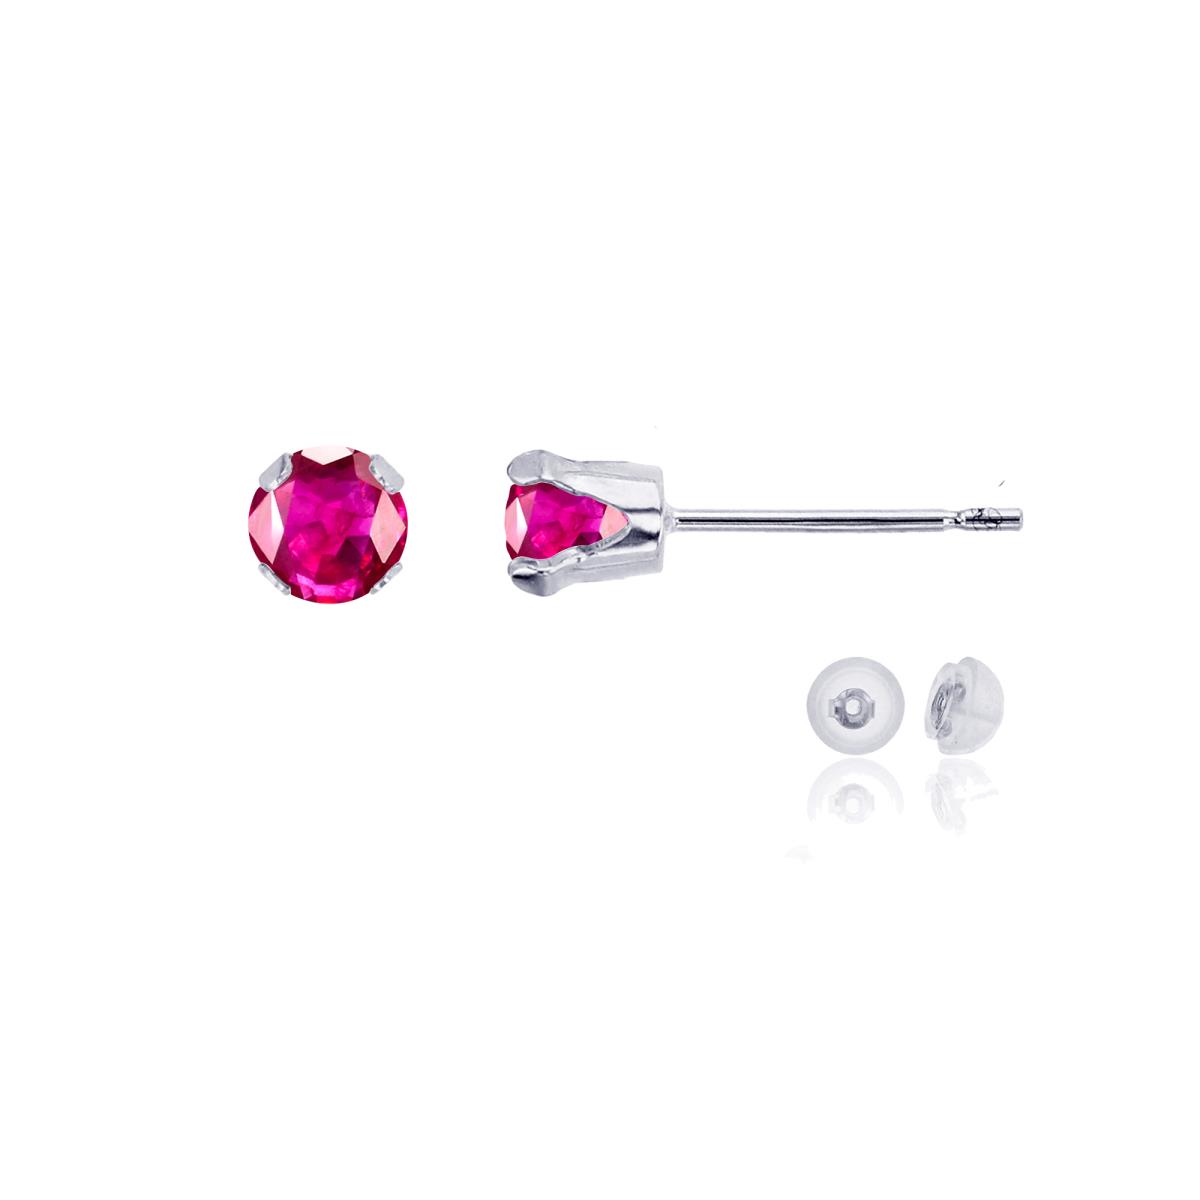 10K White Gold 4mm Round Cr Ruby Stud Earring with Silicone Back